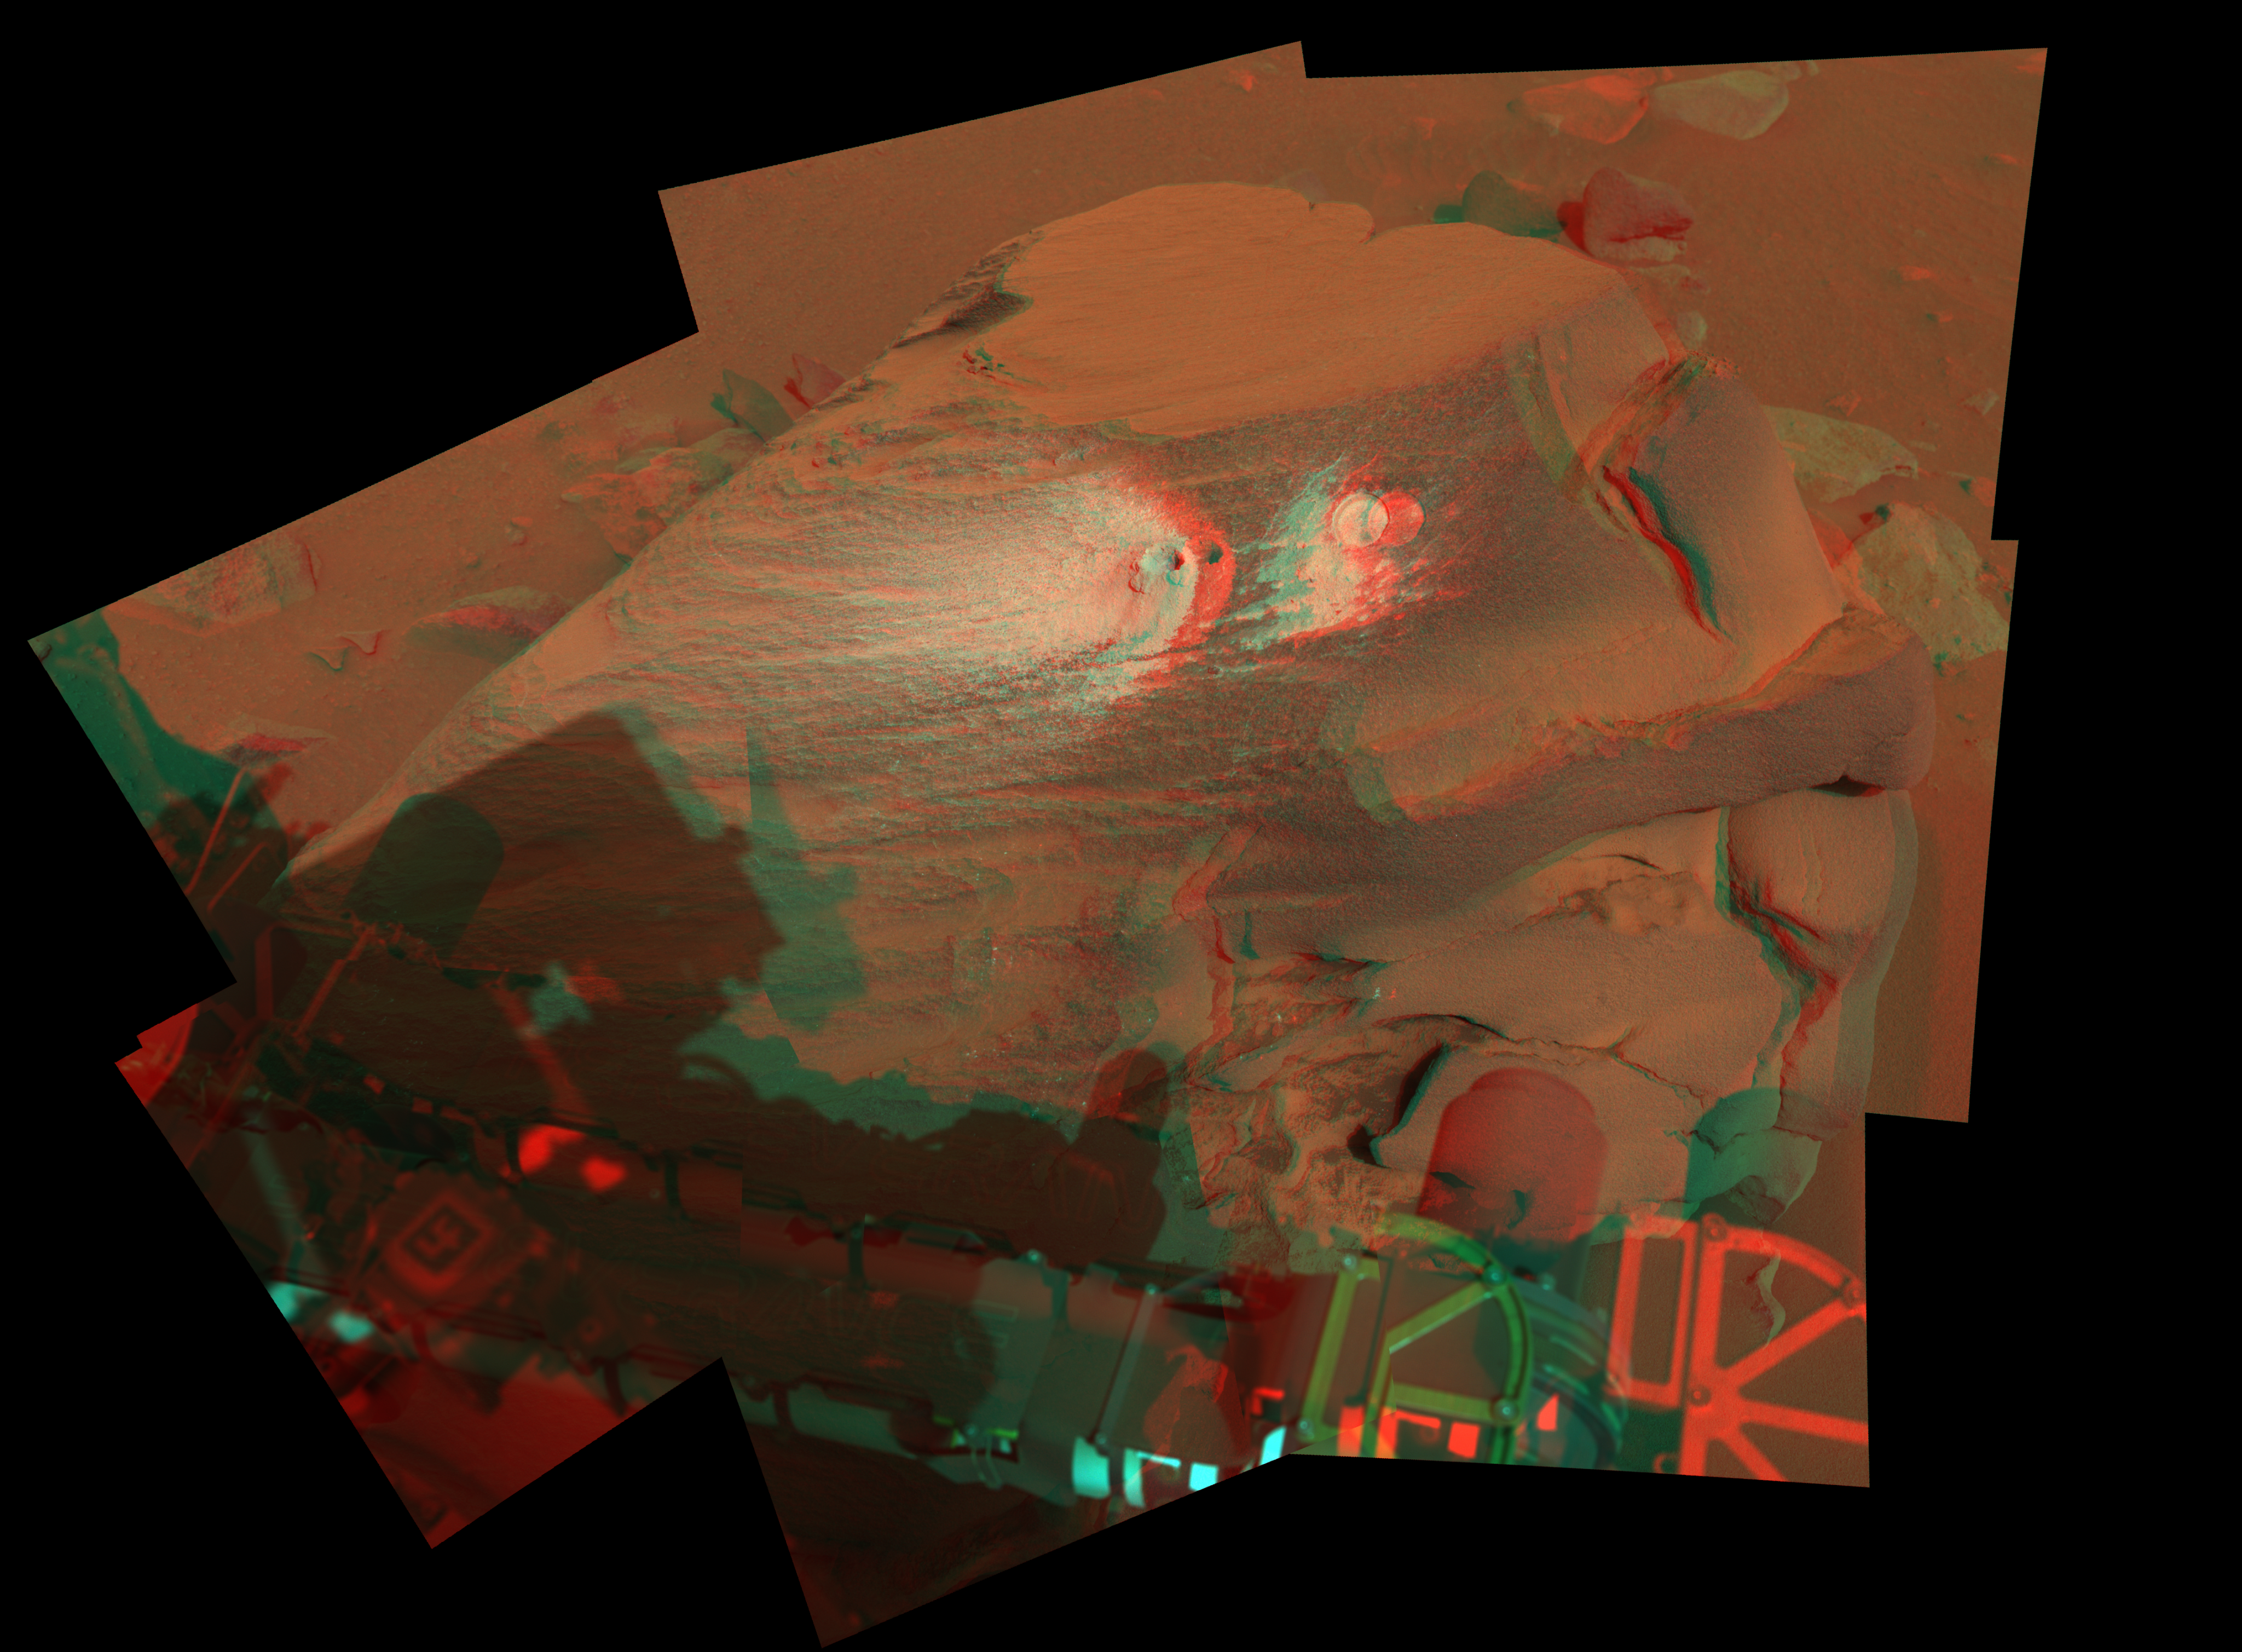 Figure B is the same mosaic, now composed of 16 images, in an anaglyph that can be viewed with red-blue 3D glasses.